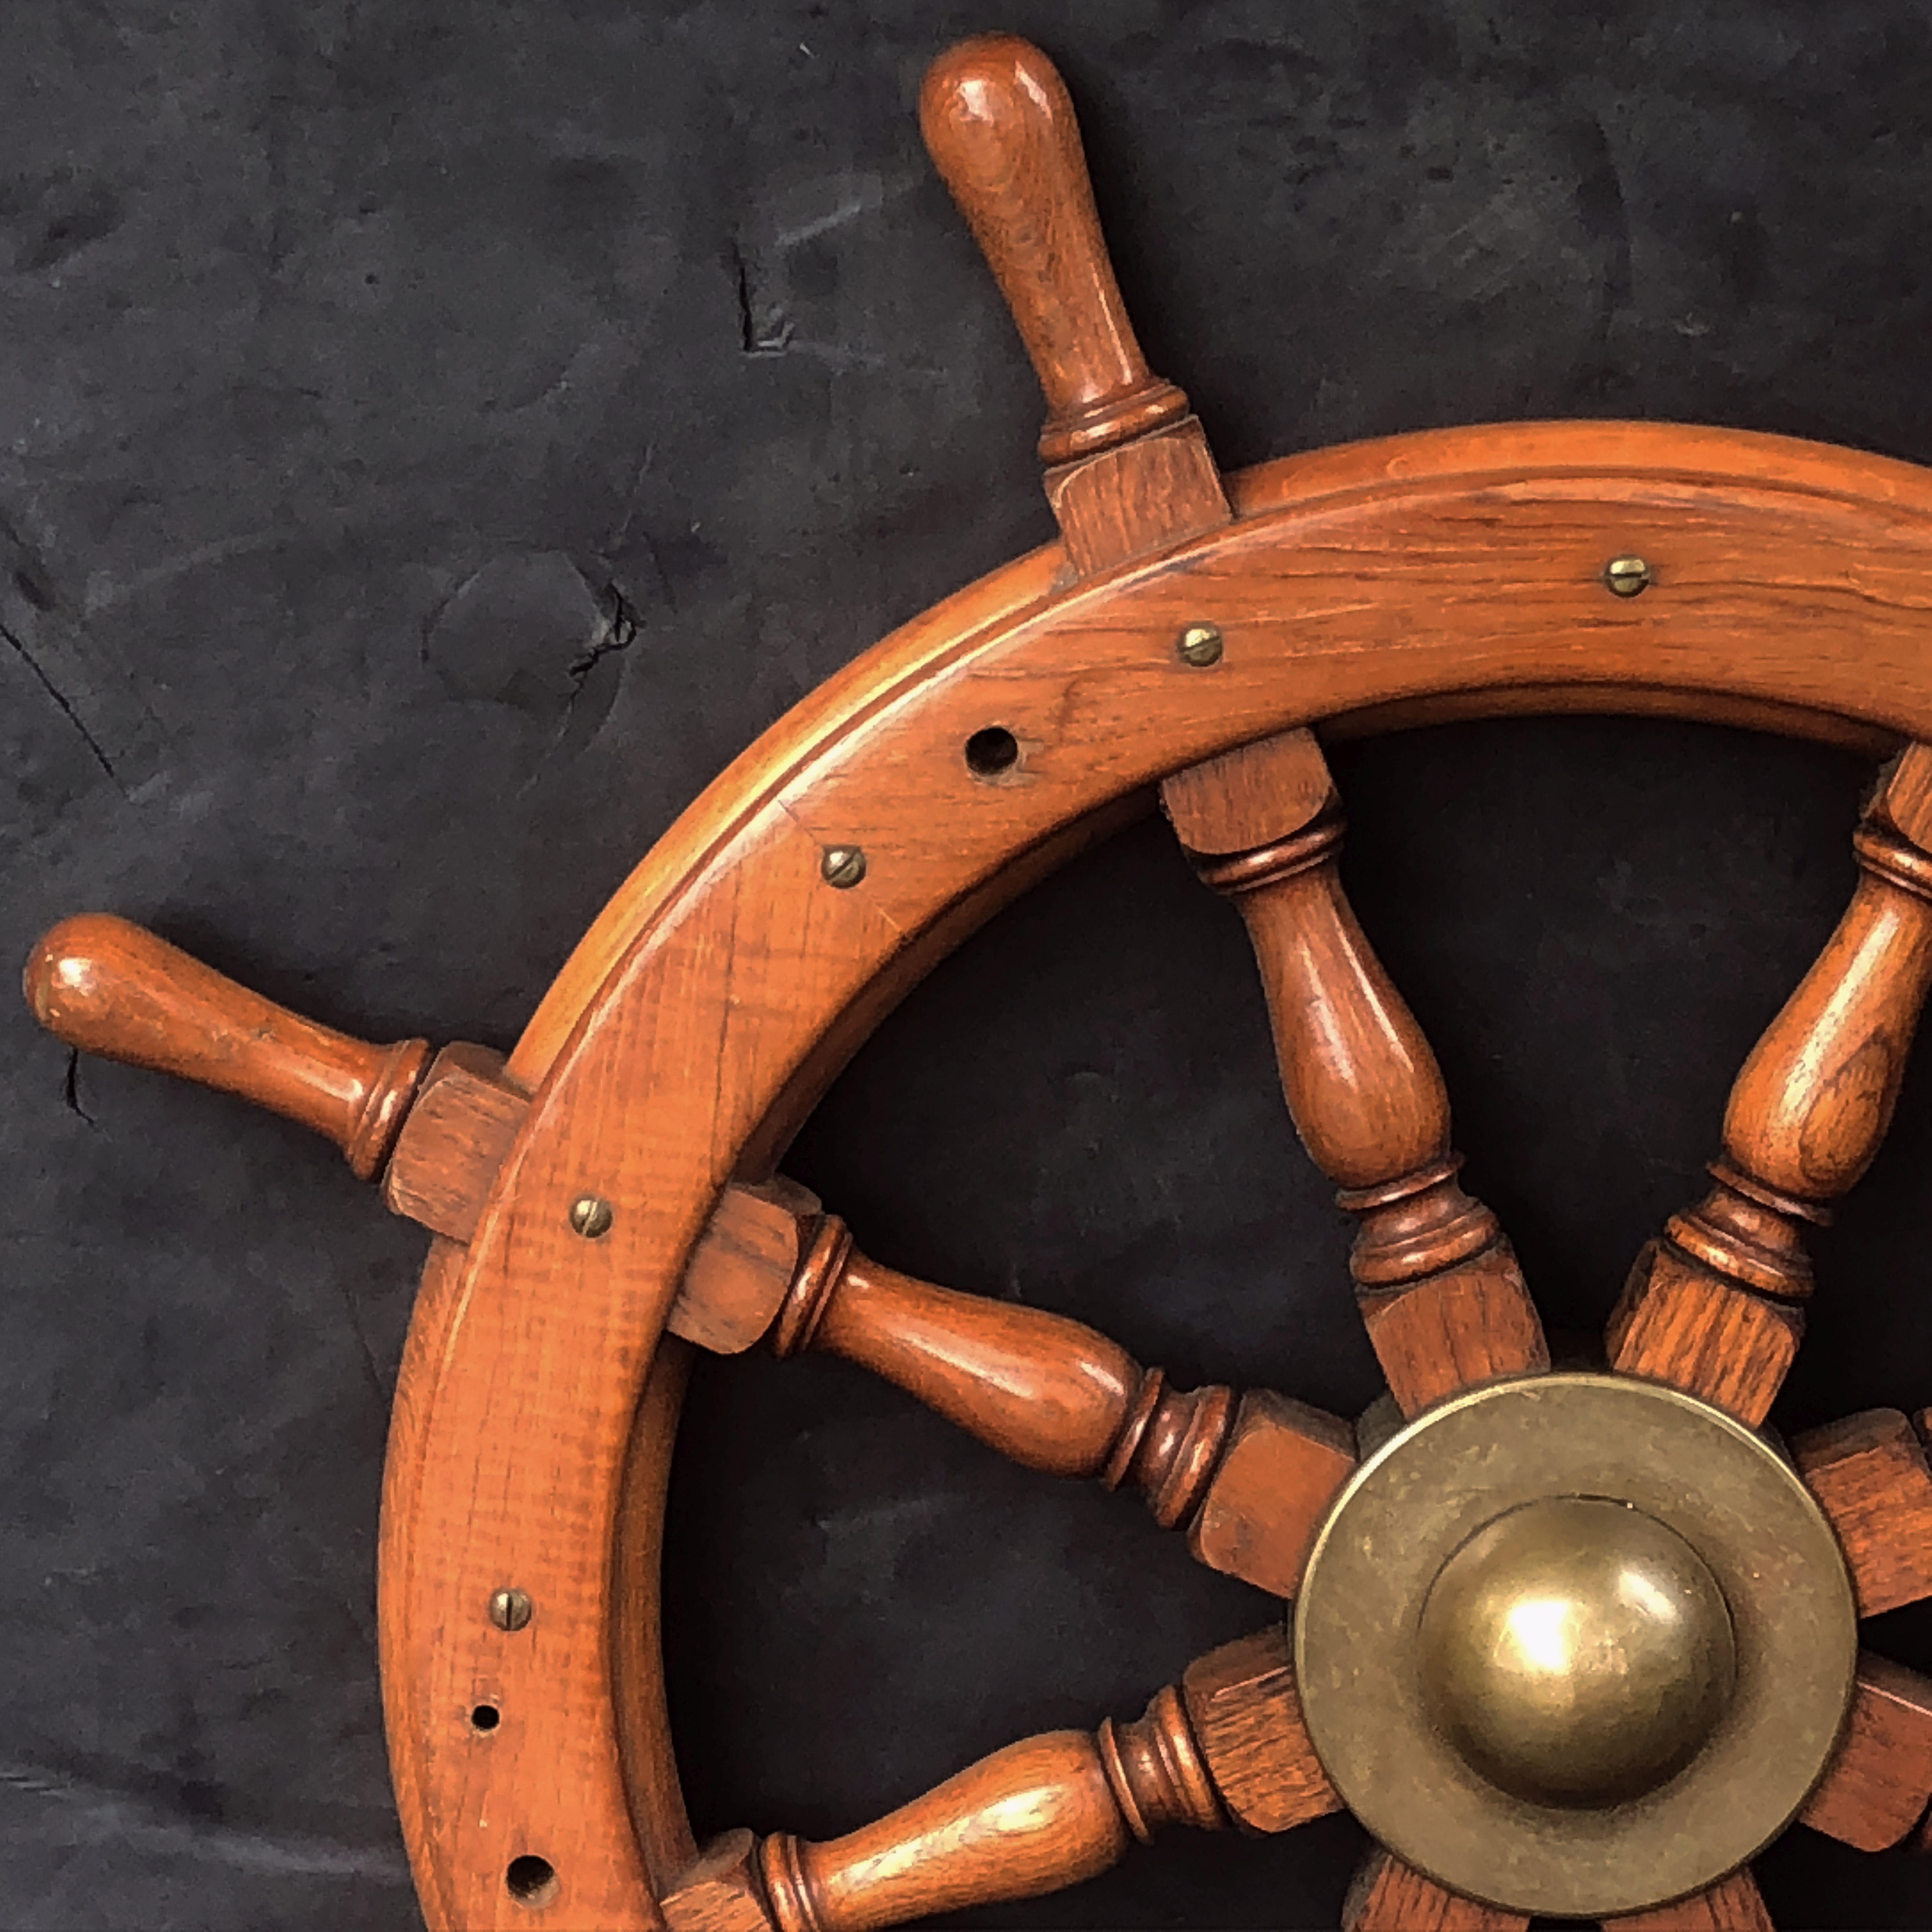 A fine Scottish ship's wheel of turned mahogany and brass, featuring an eight spoke wheel around a heavy brass hub.

Overall dimensions: 36